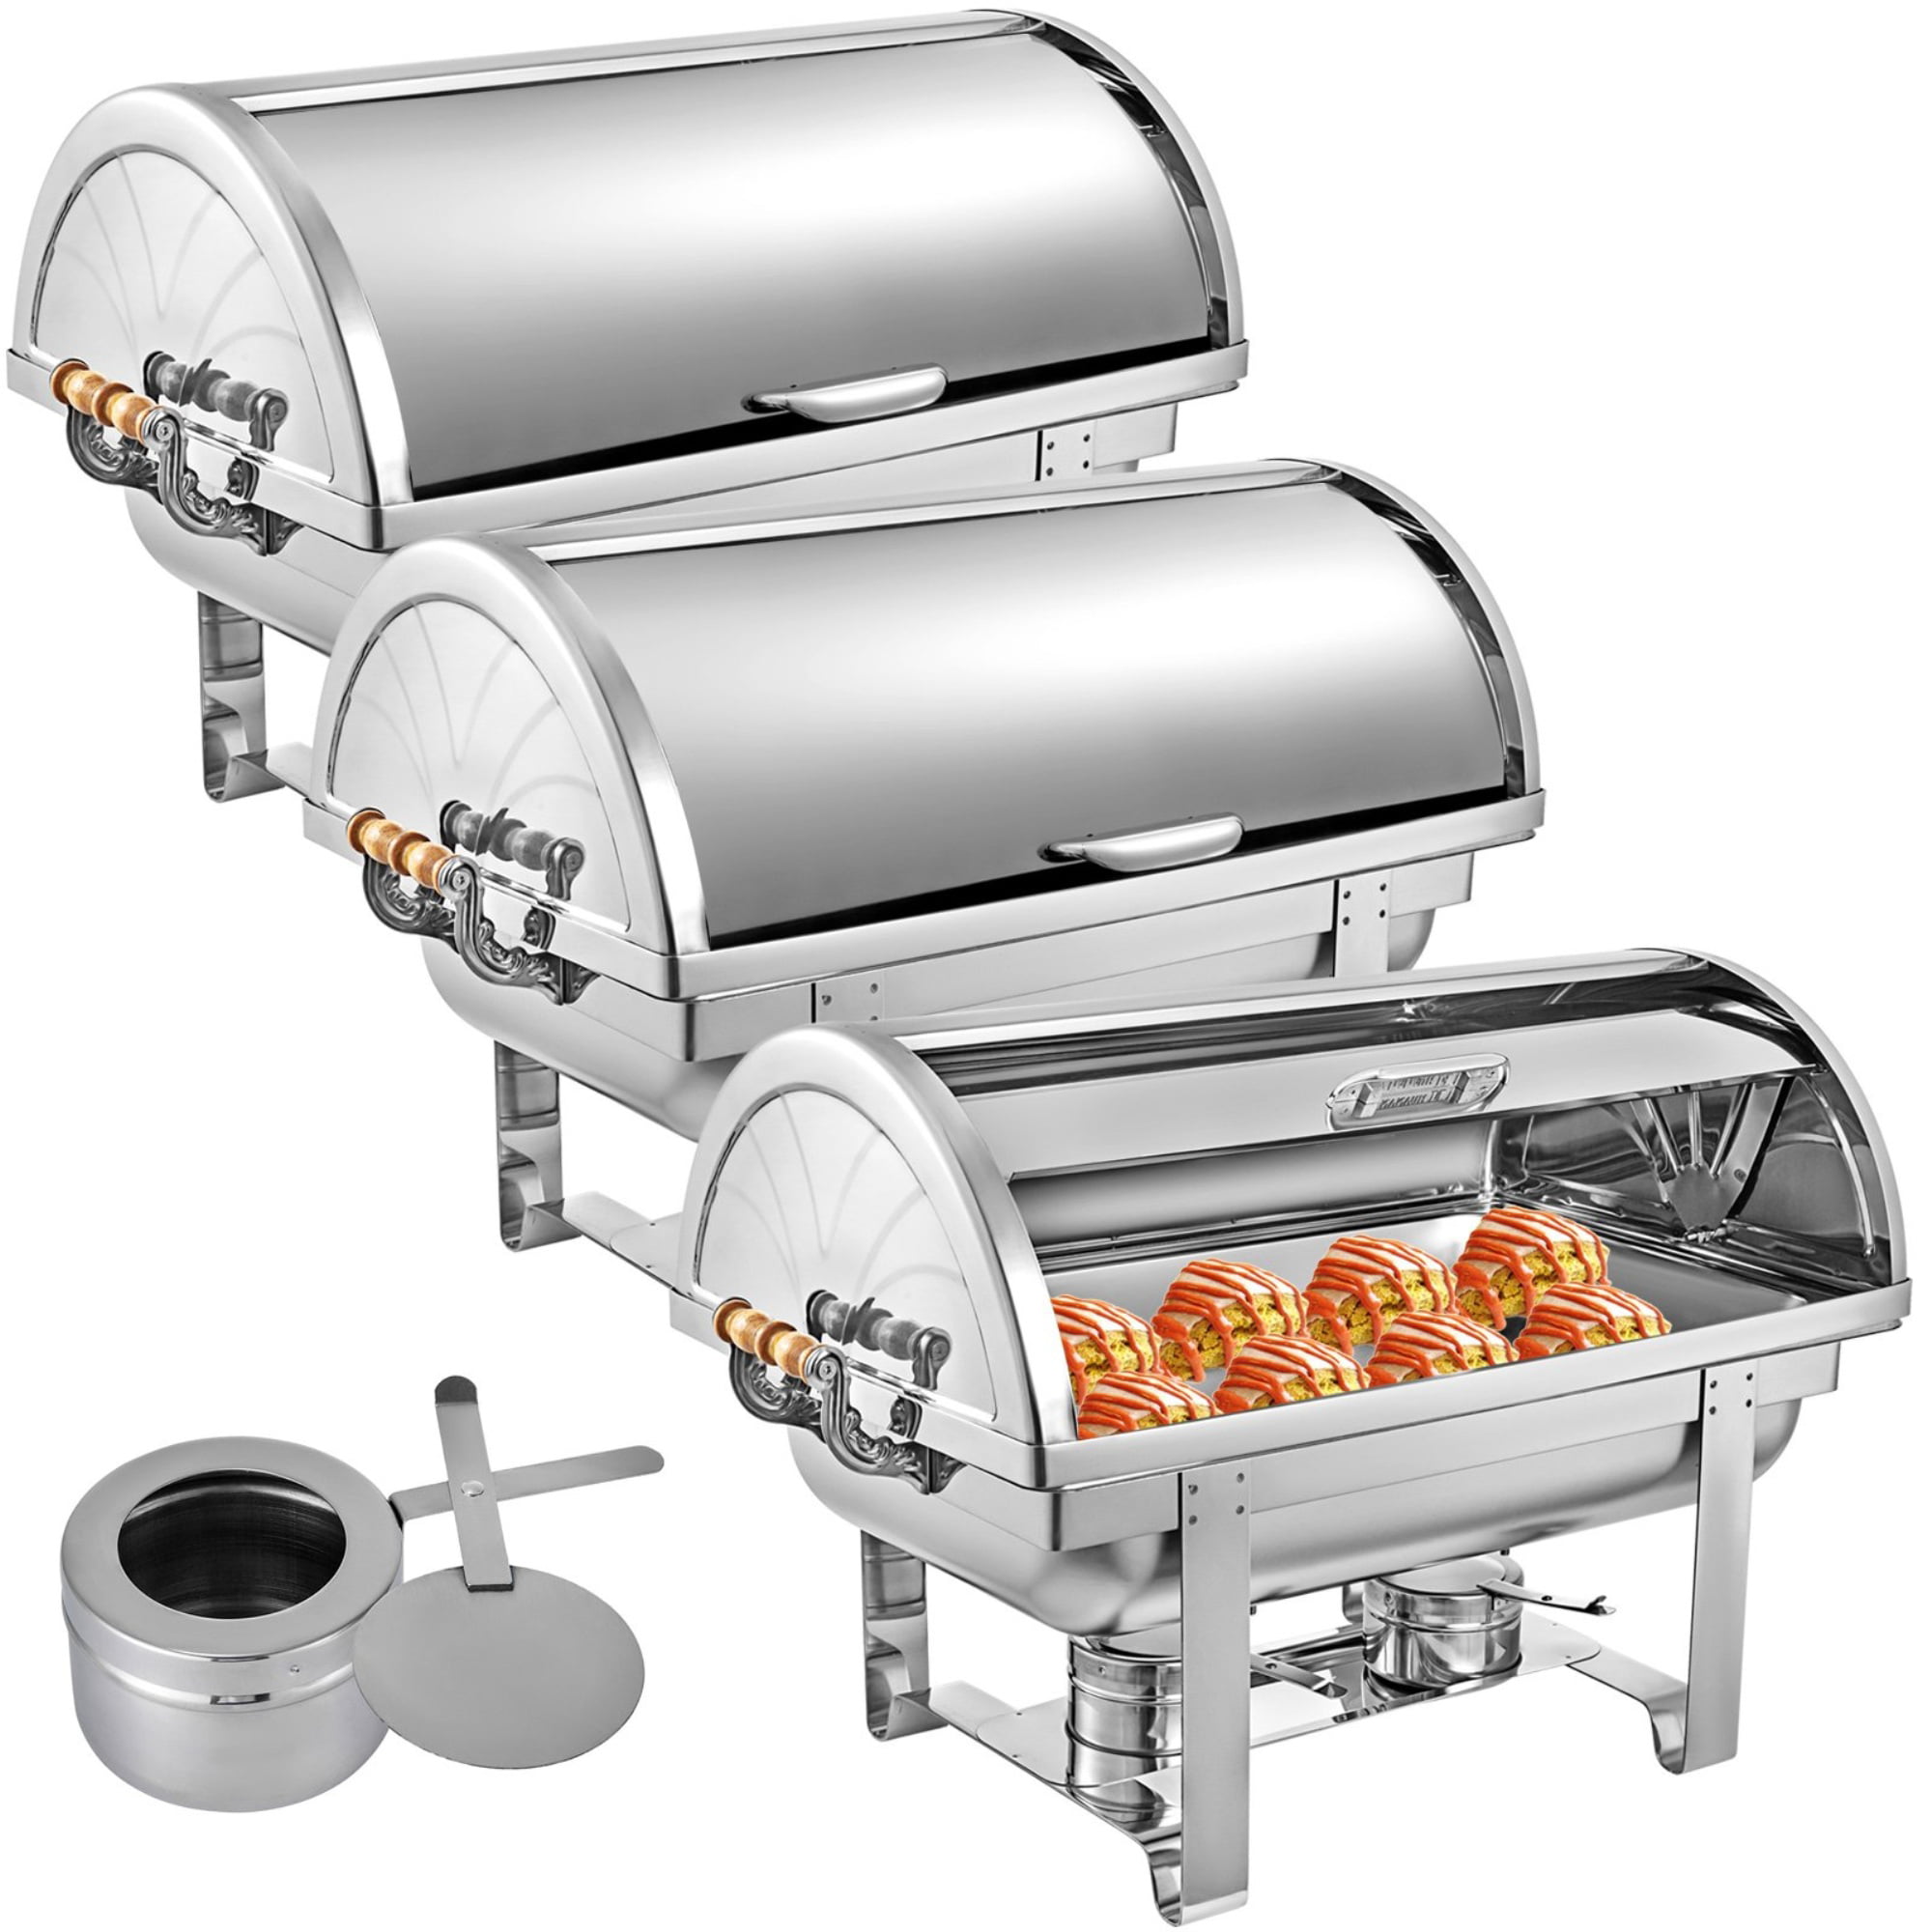 3 Packs Chafing Dish Roll Top Chafer 8 Qt Stainless Steel With handles Full Size 